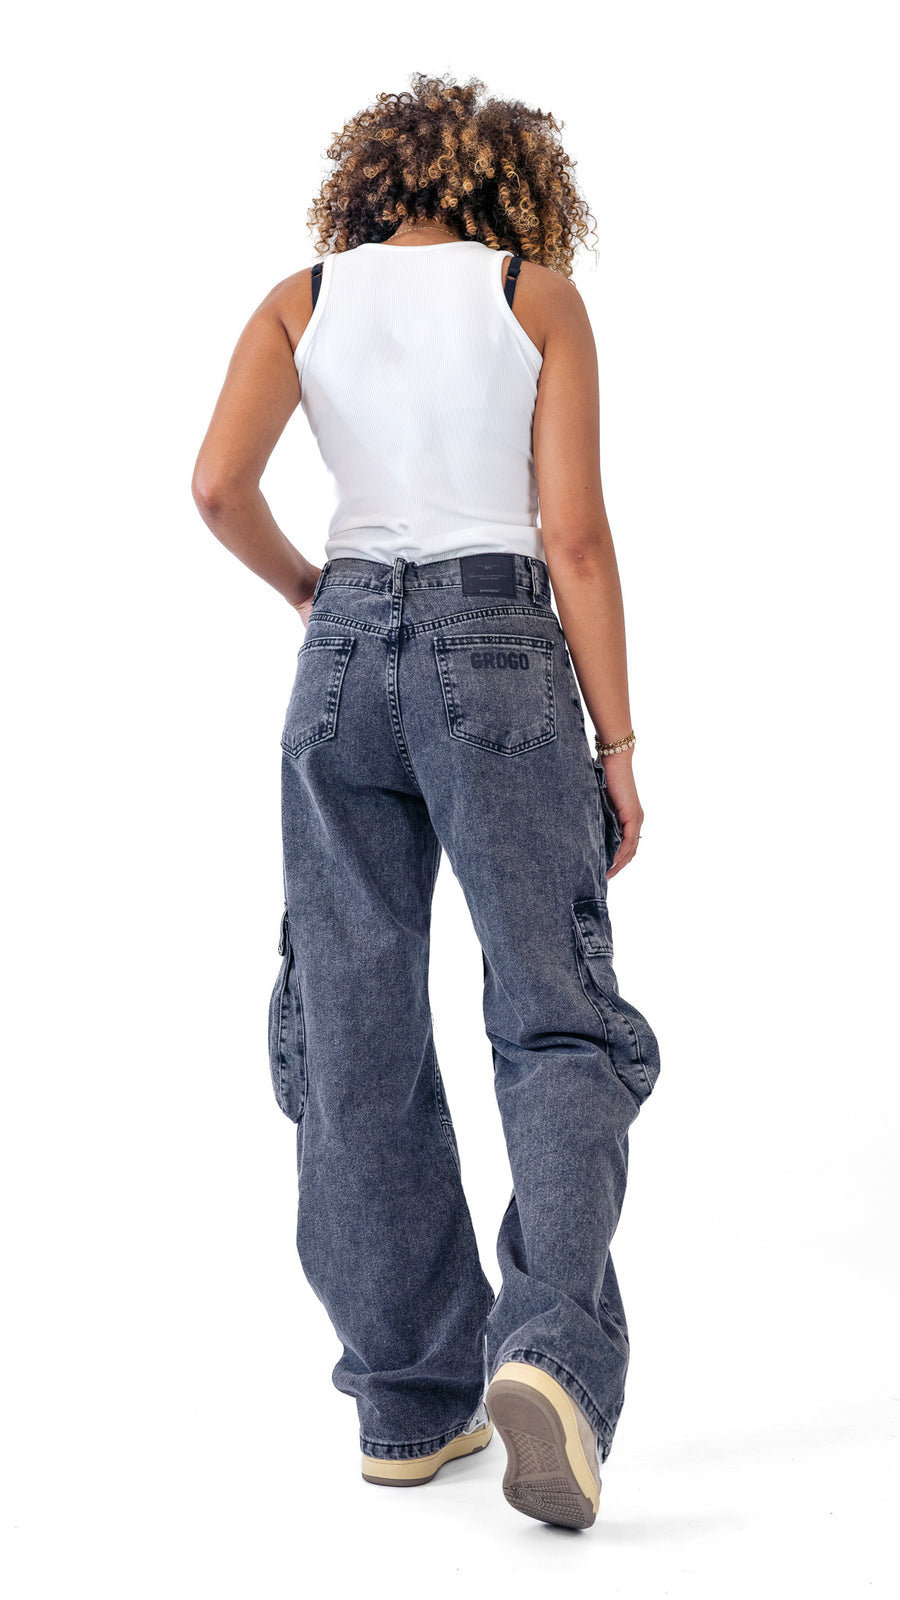 blue cargo jeans pants with pockets